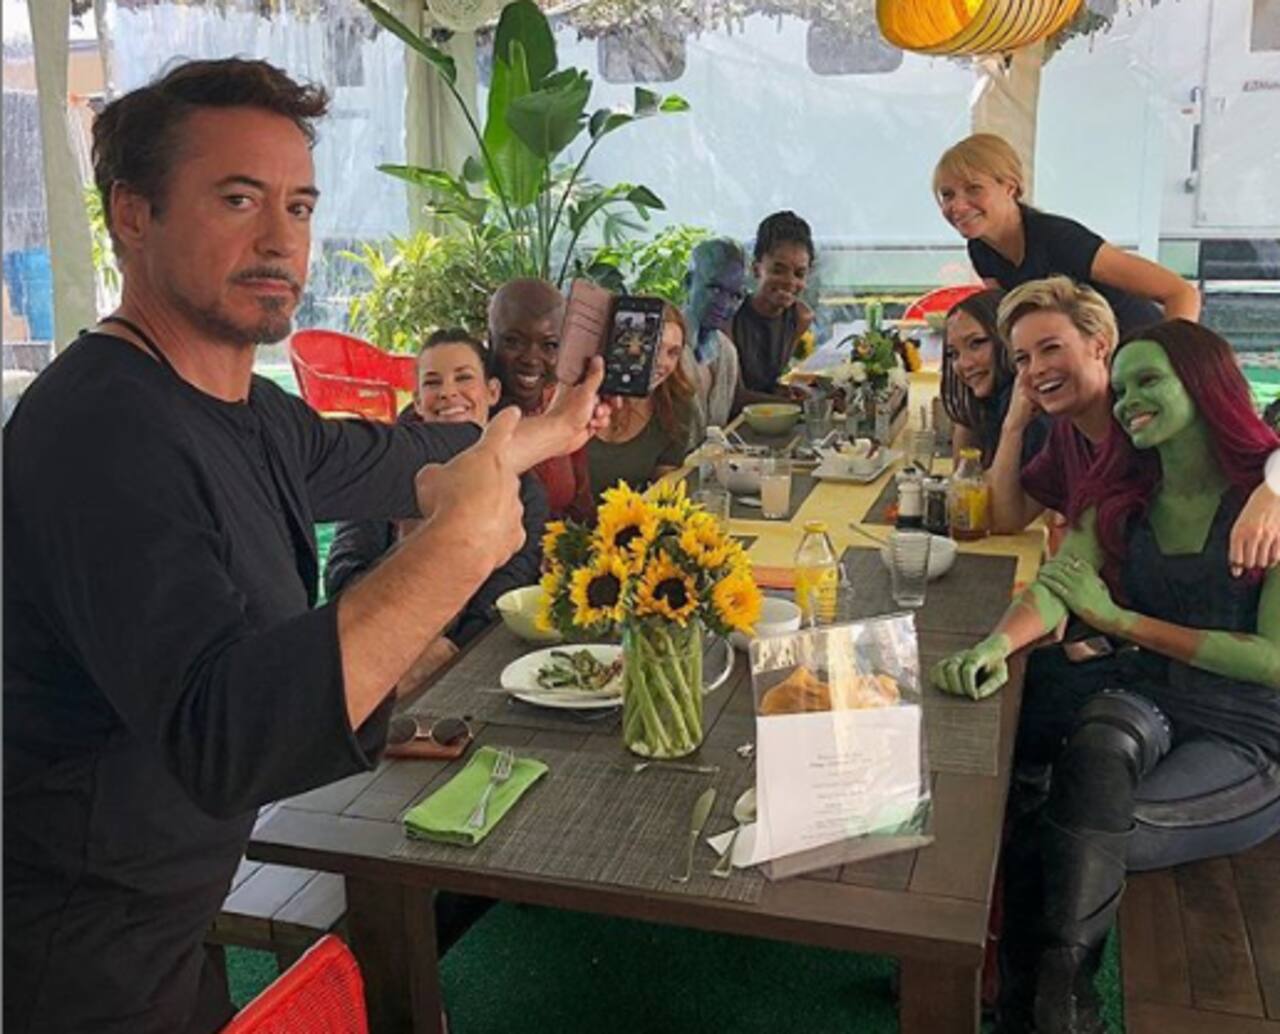 Avengers: Endgame star Robert Downey Jr. shares a throwback pic from a lunch hosted for the women of MCU